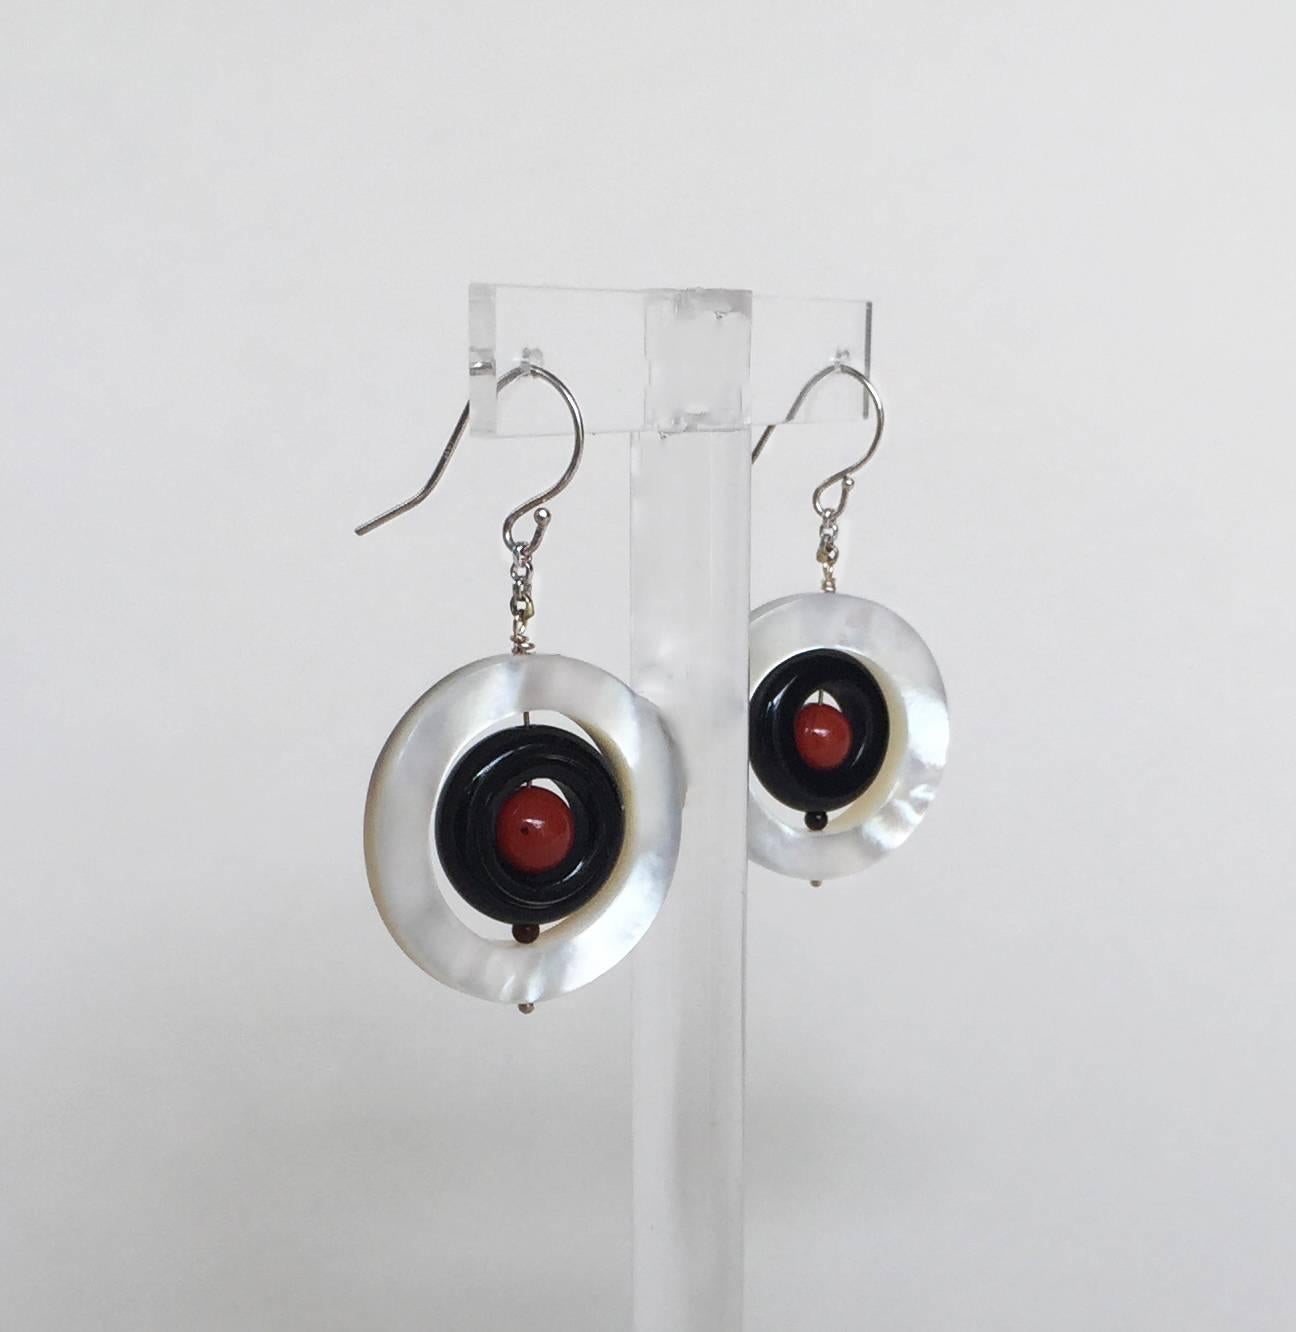 Natural coloration of the mother pearl ring shines and highlights the elegant combination of  the vibrant coral and black onyx. The beads hang on a 14k white gold chain and wire allowing the earrings to dangle more with movement. 